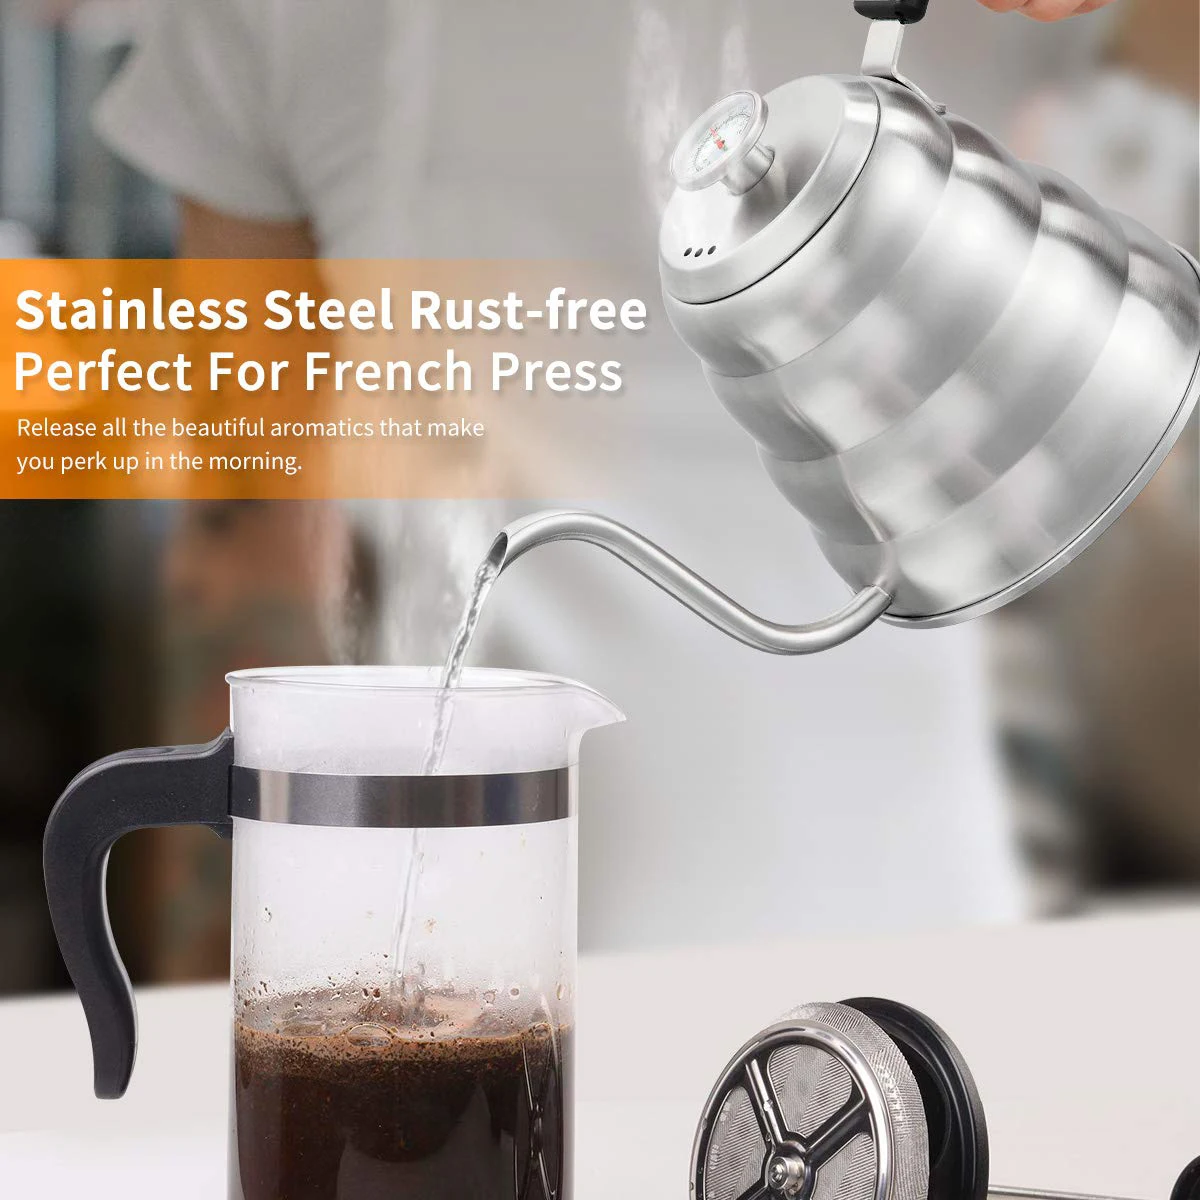 https://ae01.alicdn.com/kf/S637c95803801420a9e79868c04e7fd0eX/Thermometer-Coffee-Pot-Stainless-Steels-Moka-Pot-French-Press-Suitable-for-Any-Heat-Source-Brew-Espresso.jpg